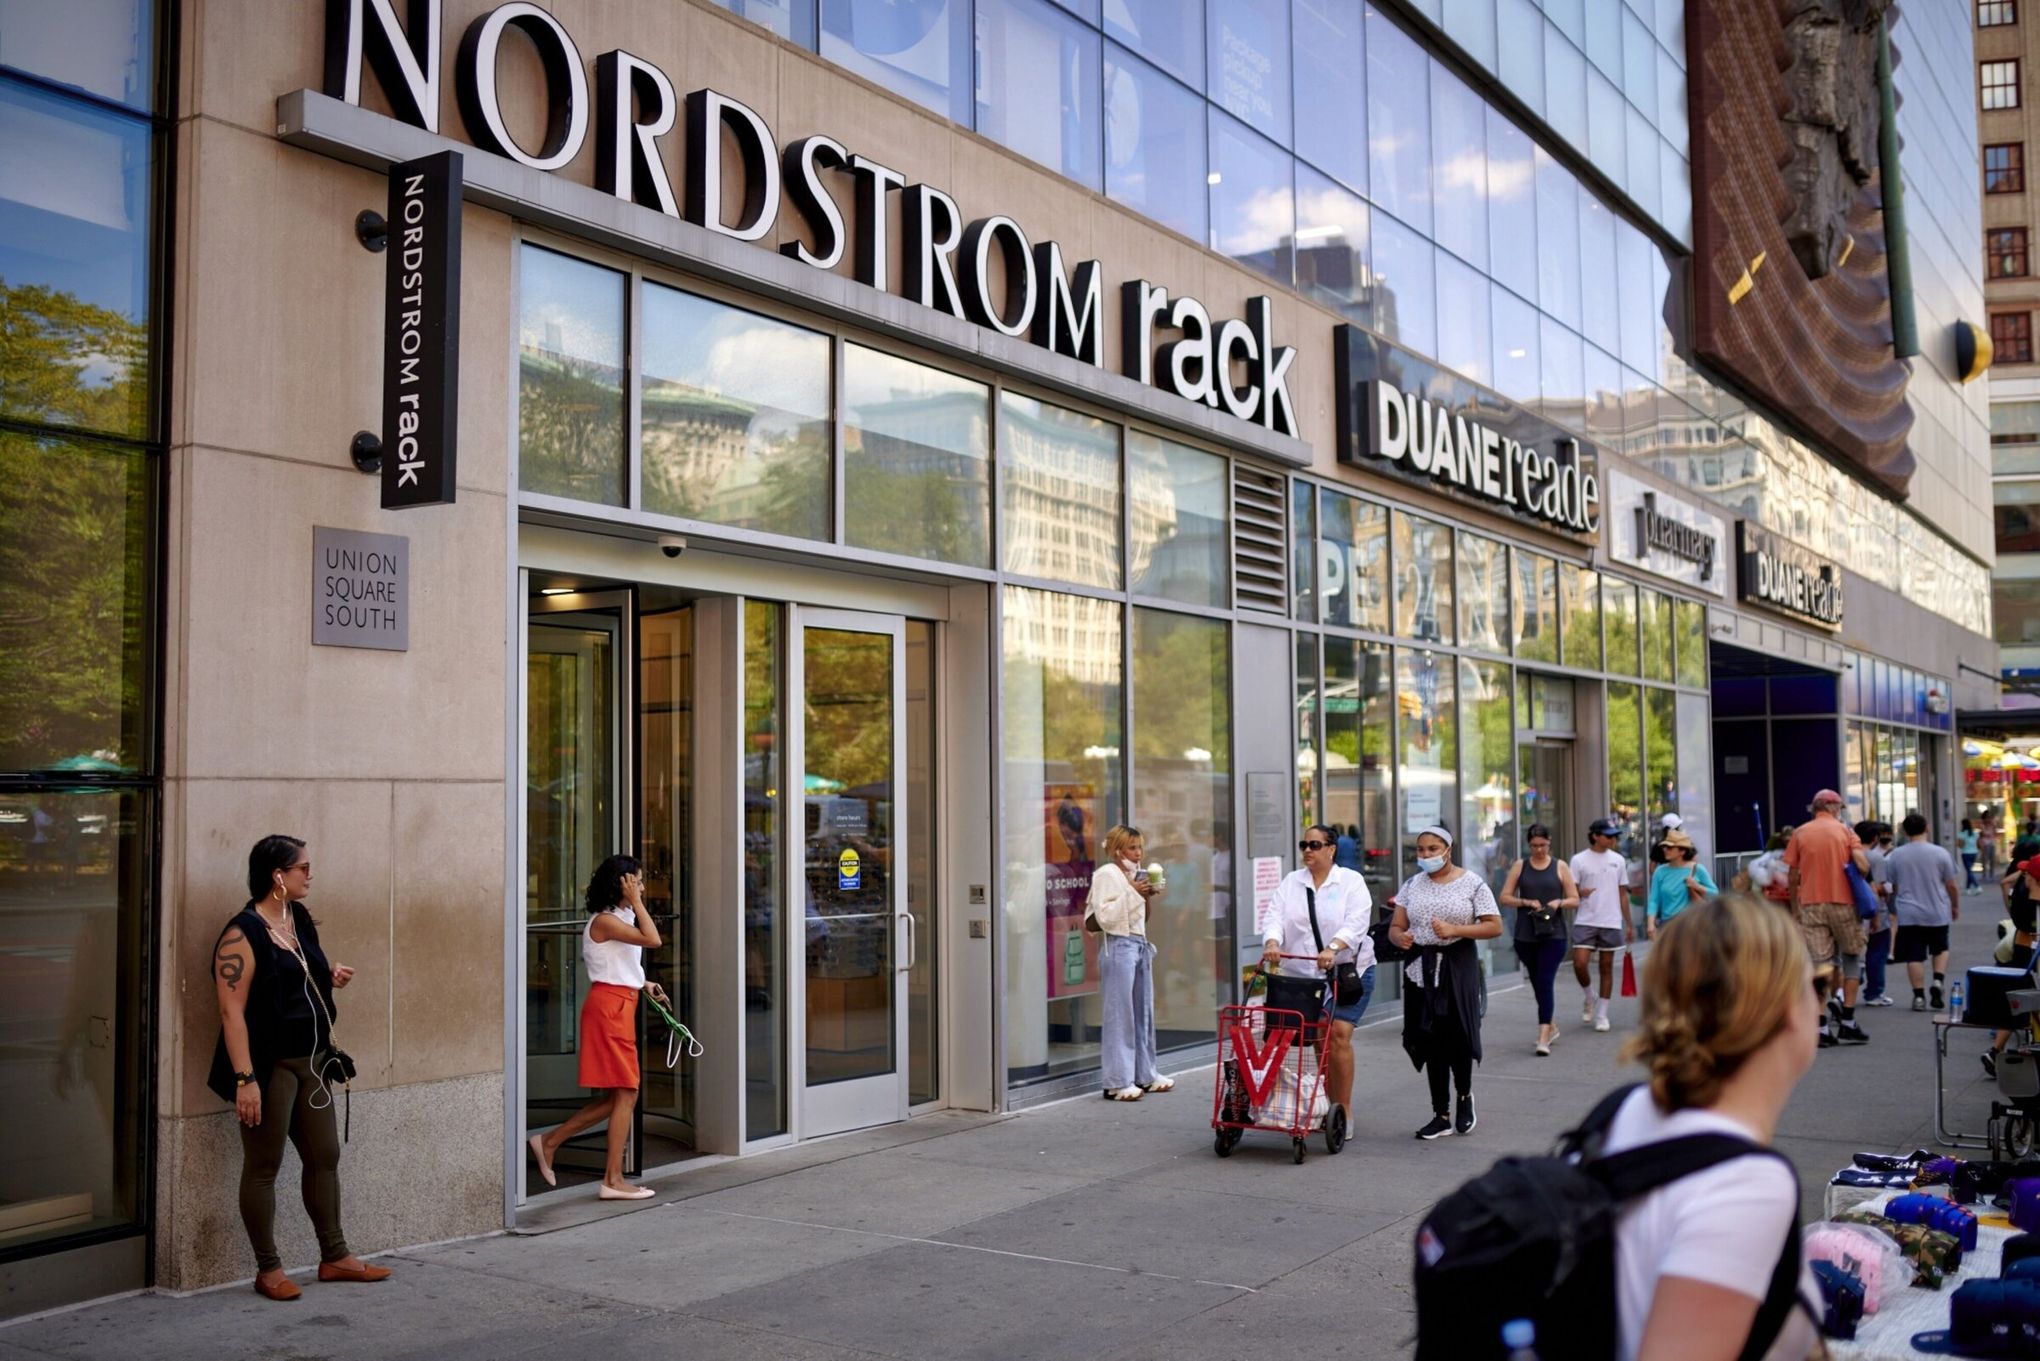 Patagonia accuses Nordstrom of selling counterfeit items at the